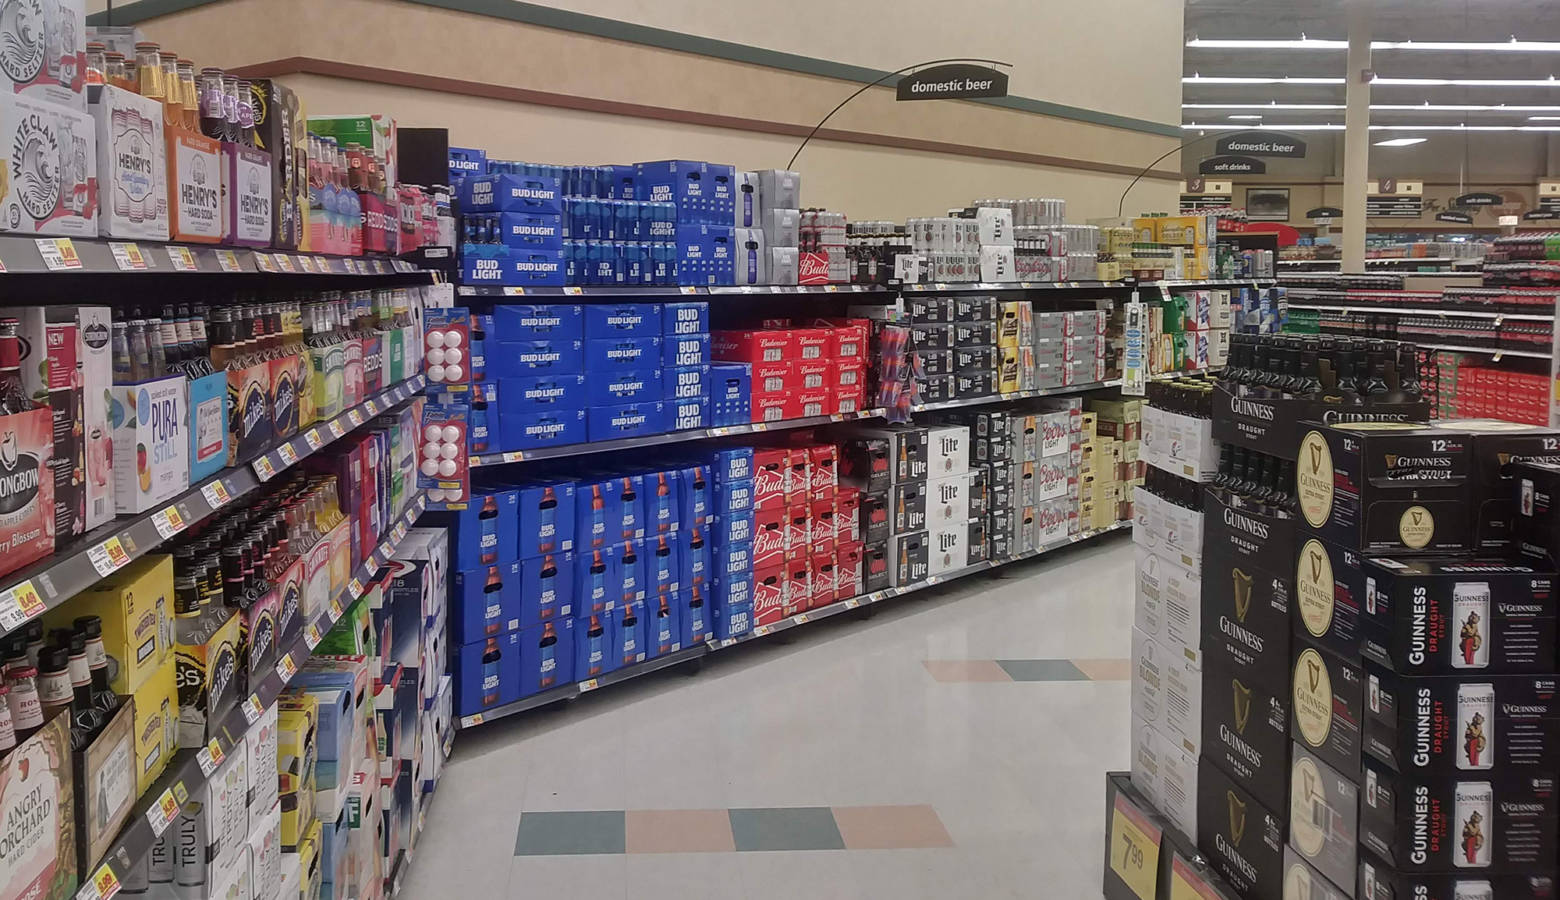 Some considered provisions affect grocery stores: clerks would have to be at least 21 years old and go through training to ring up alcohol. And the stores would have to keep all their alcohol confined to one area. (Lauren Chapman/IPB News)